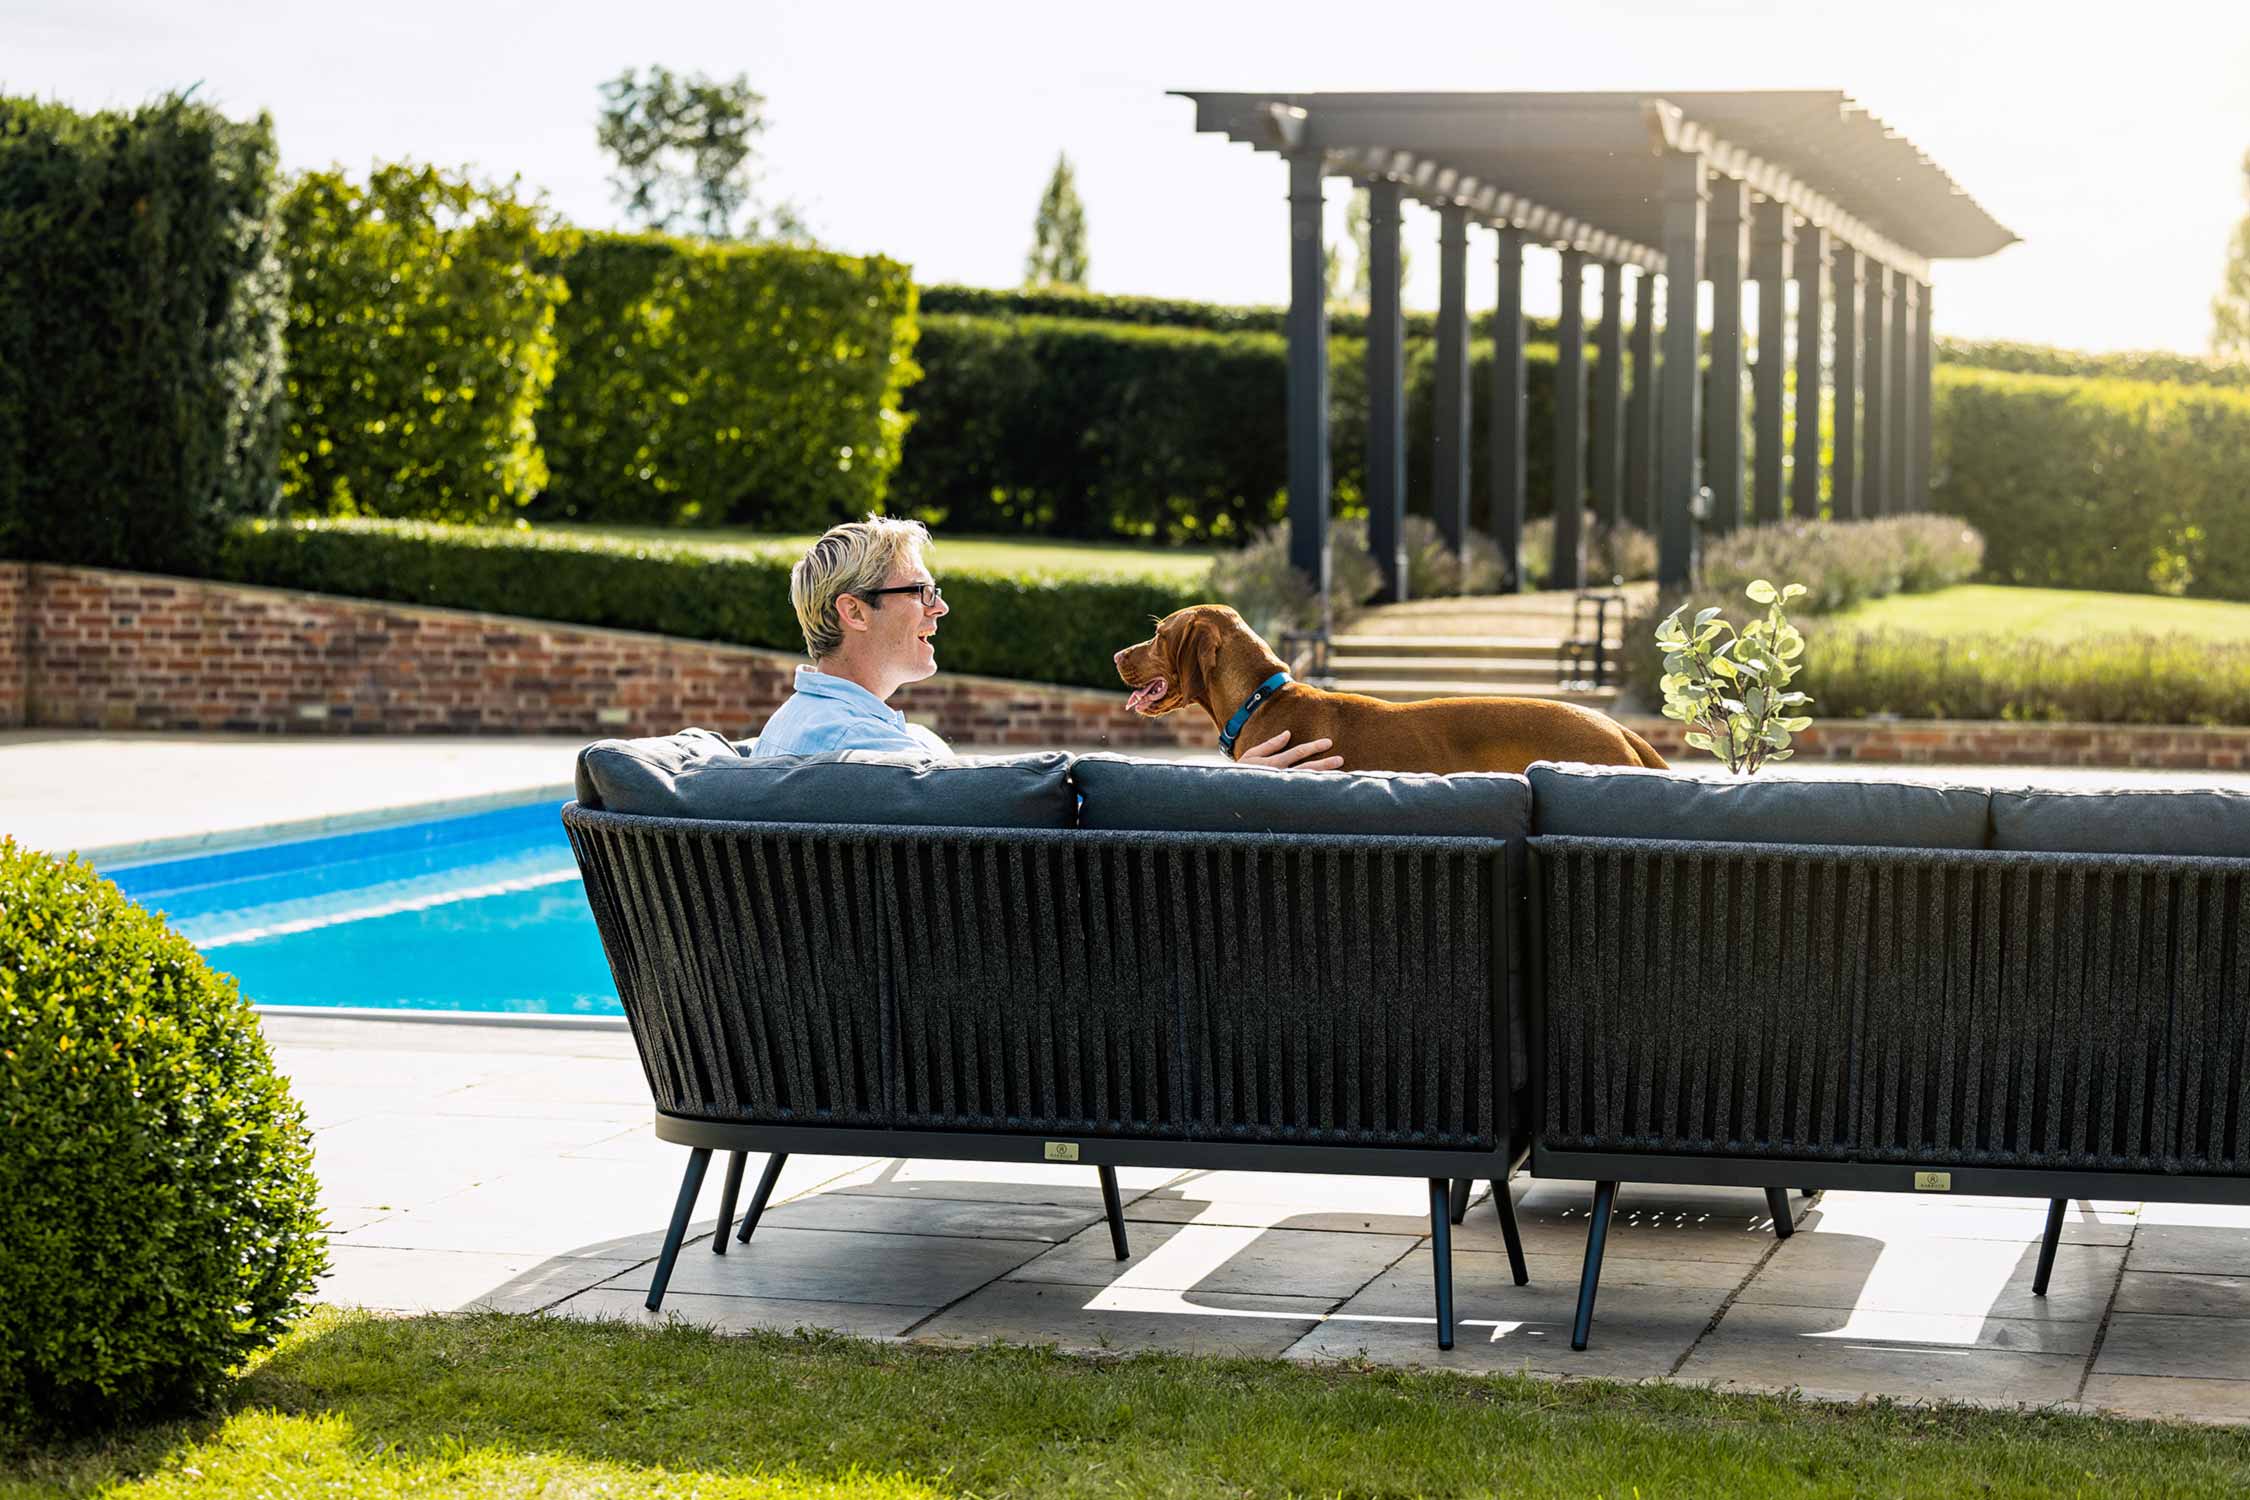 Lifestyle product photography of a high end garden furniture with a man and dog by a swimming pool in a smart summer garden.